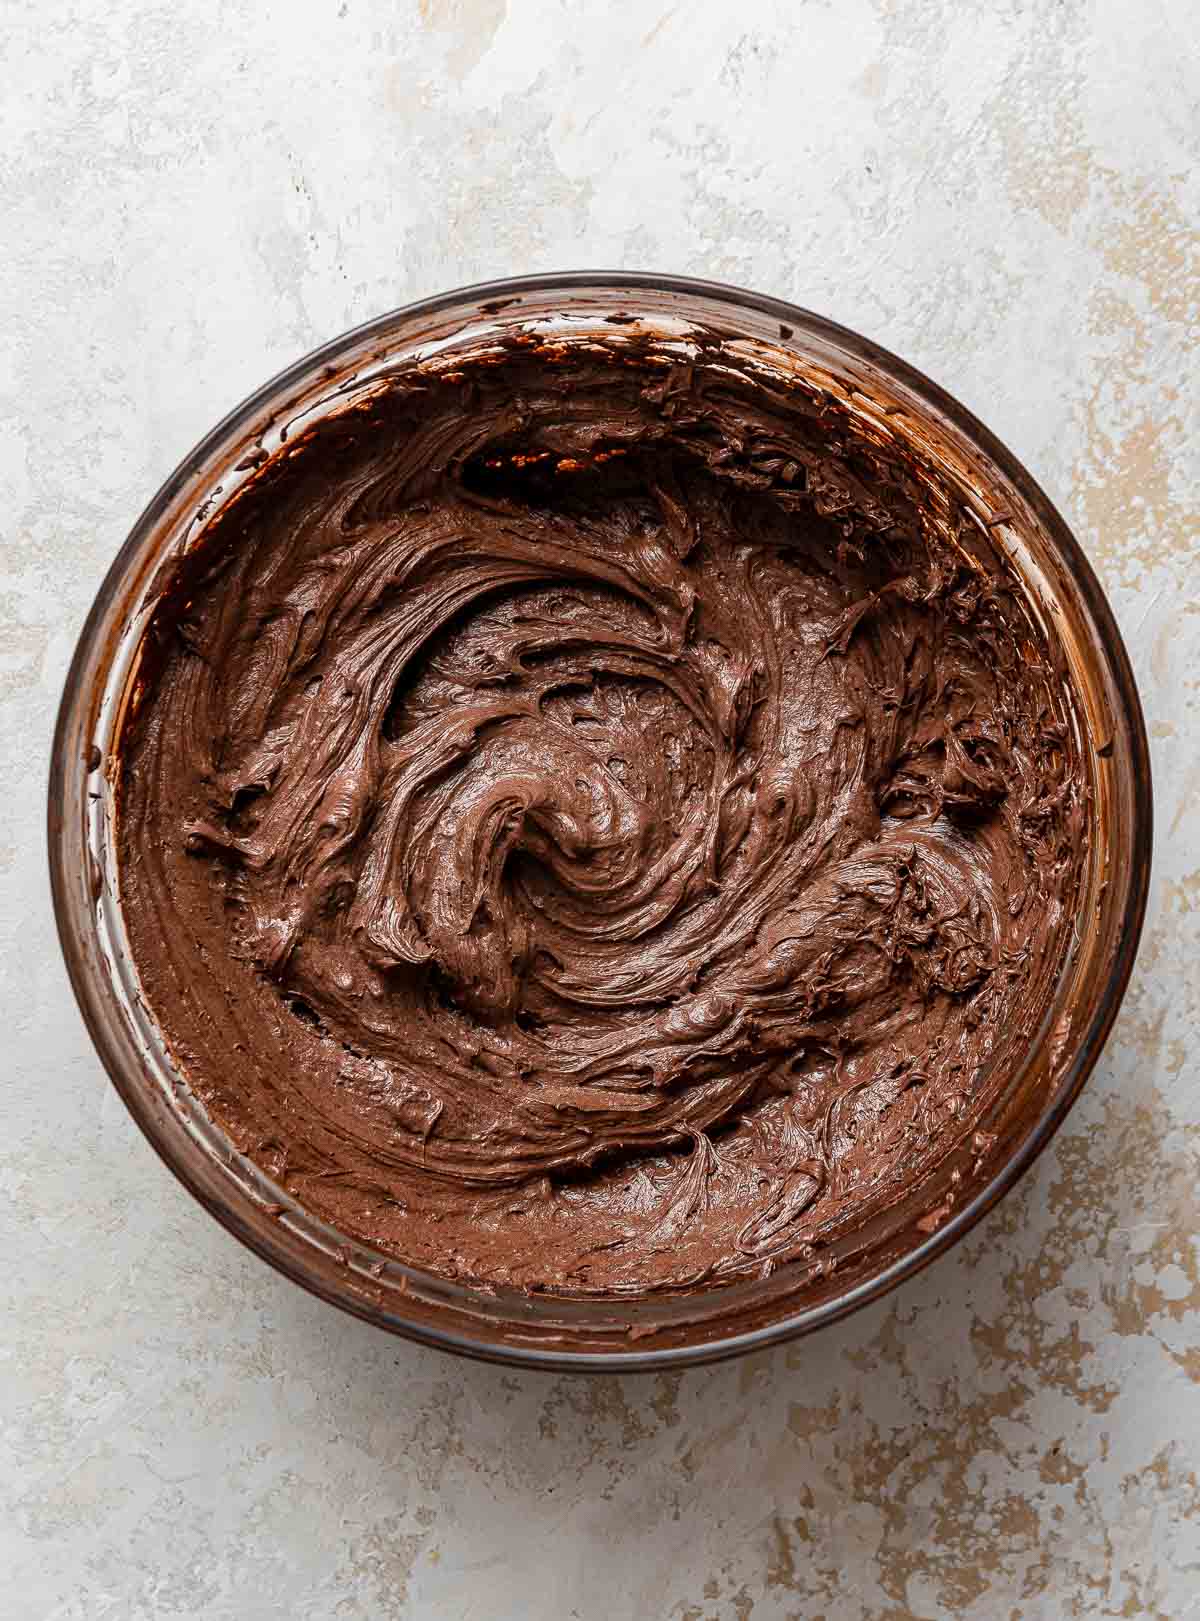 Round bowl of whipped chocolate frosting.